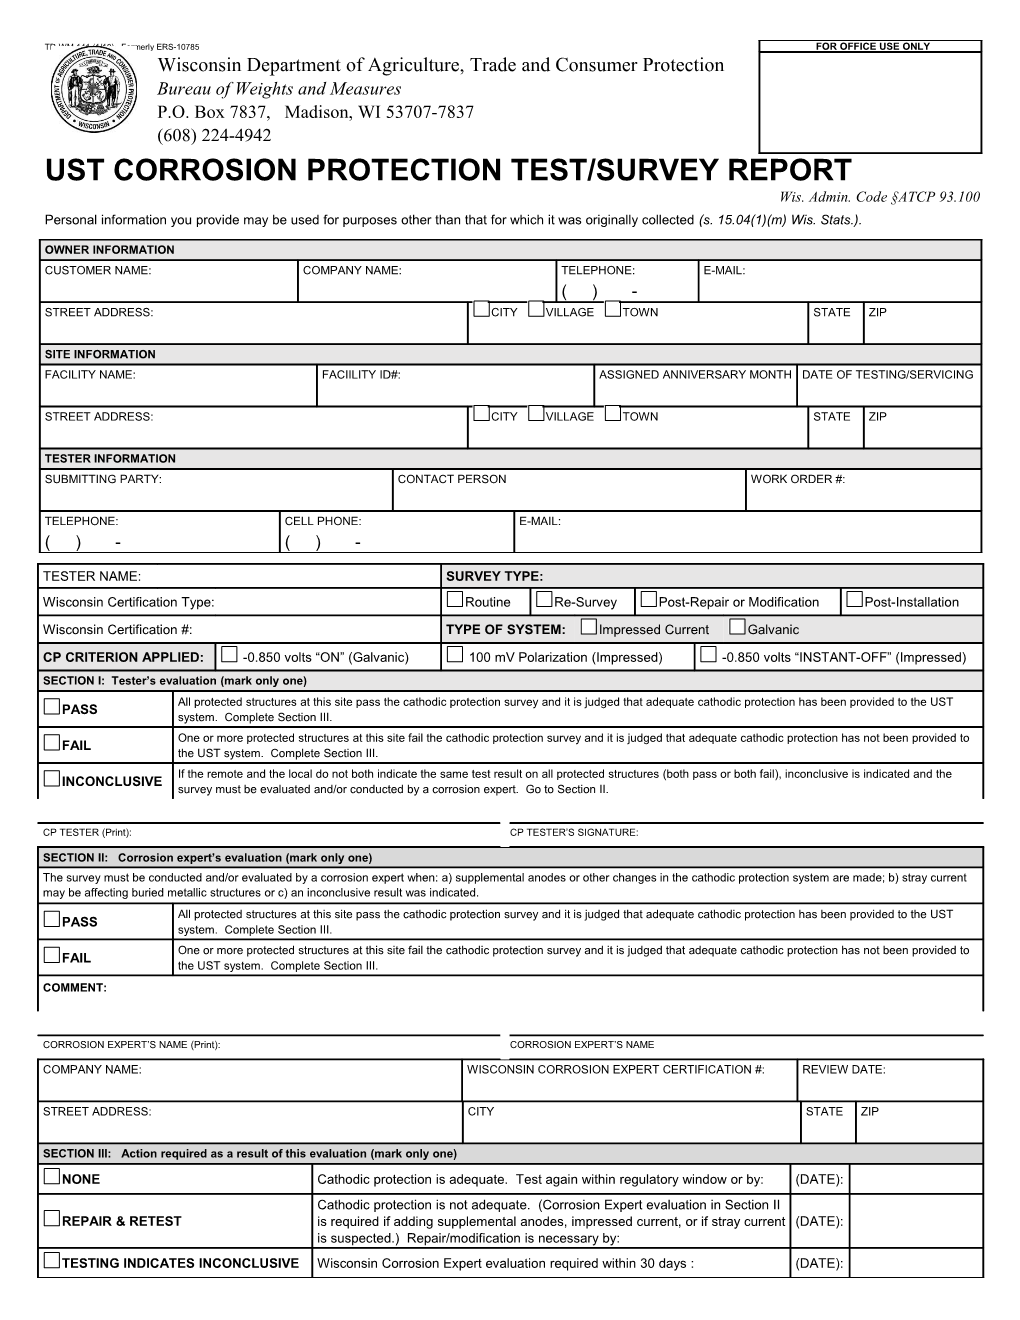 UST Corrosion Protection Test/Survey Report